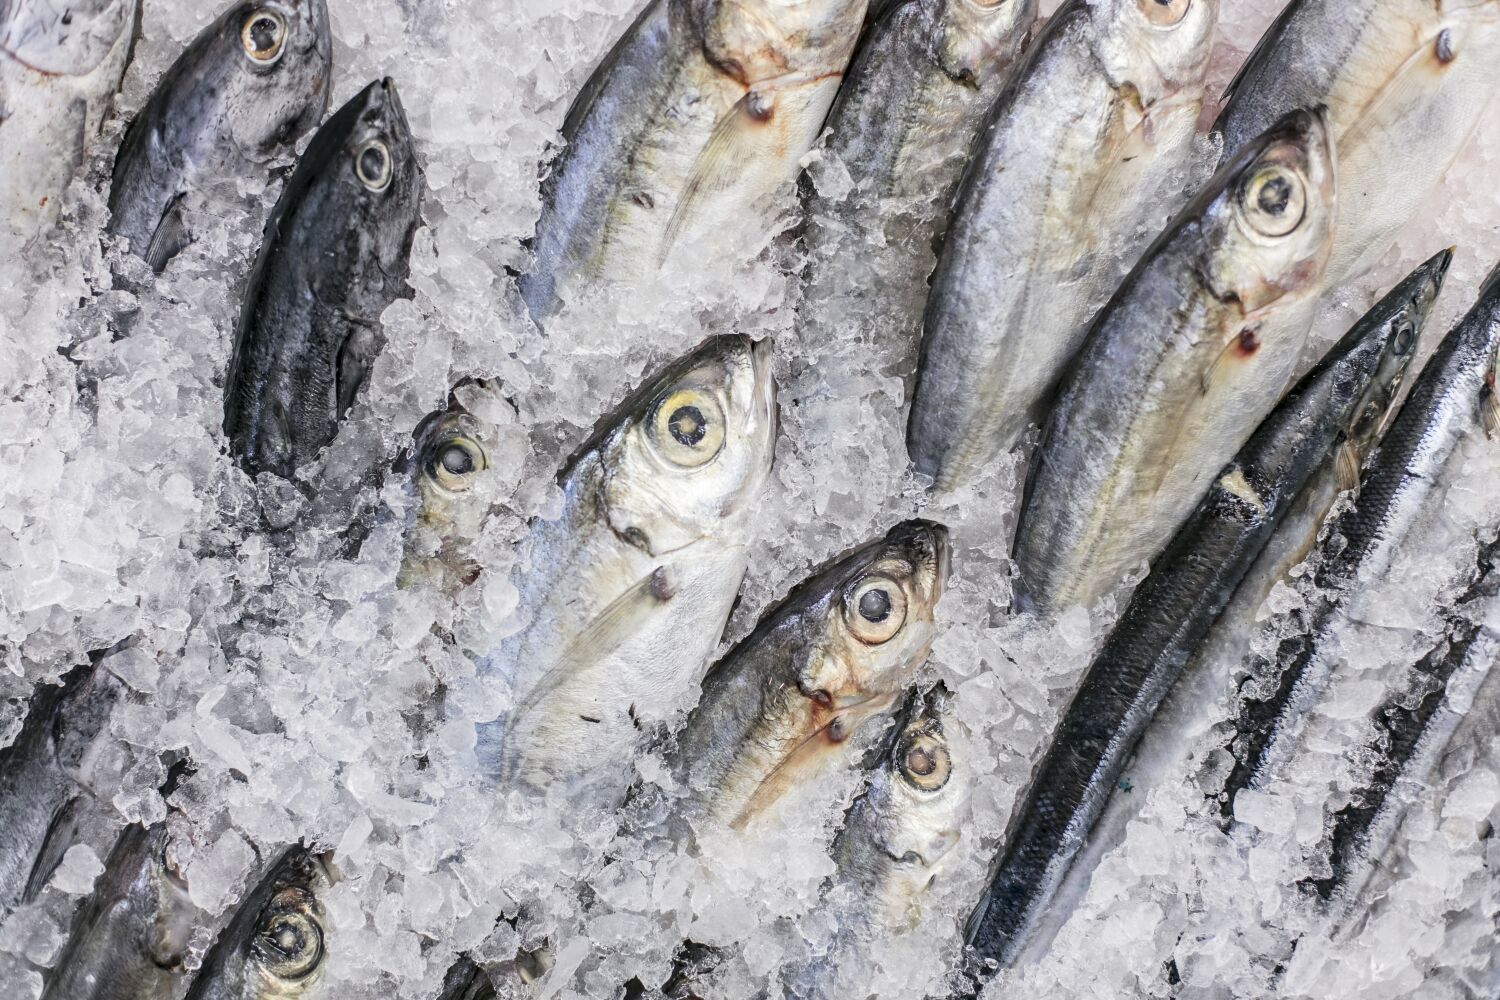 Op-Ed: How Americans can get more safe, sustainable seafood on their plates